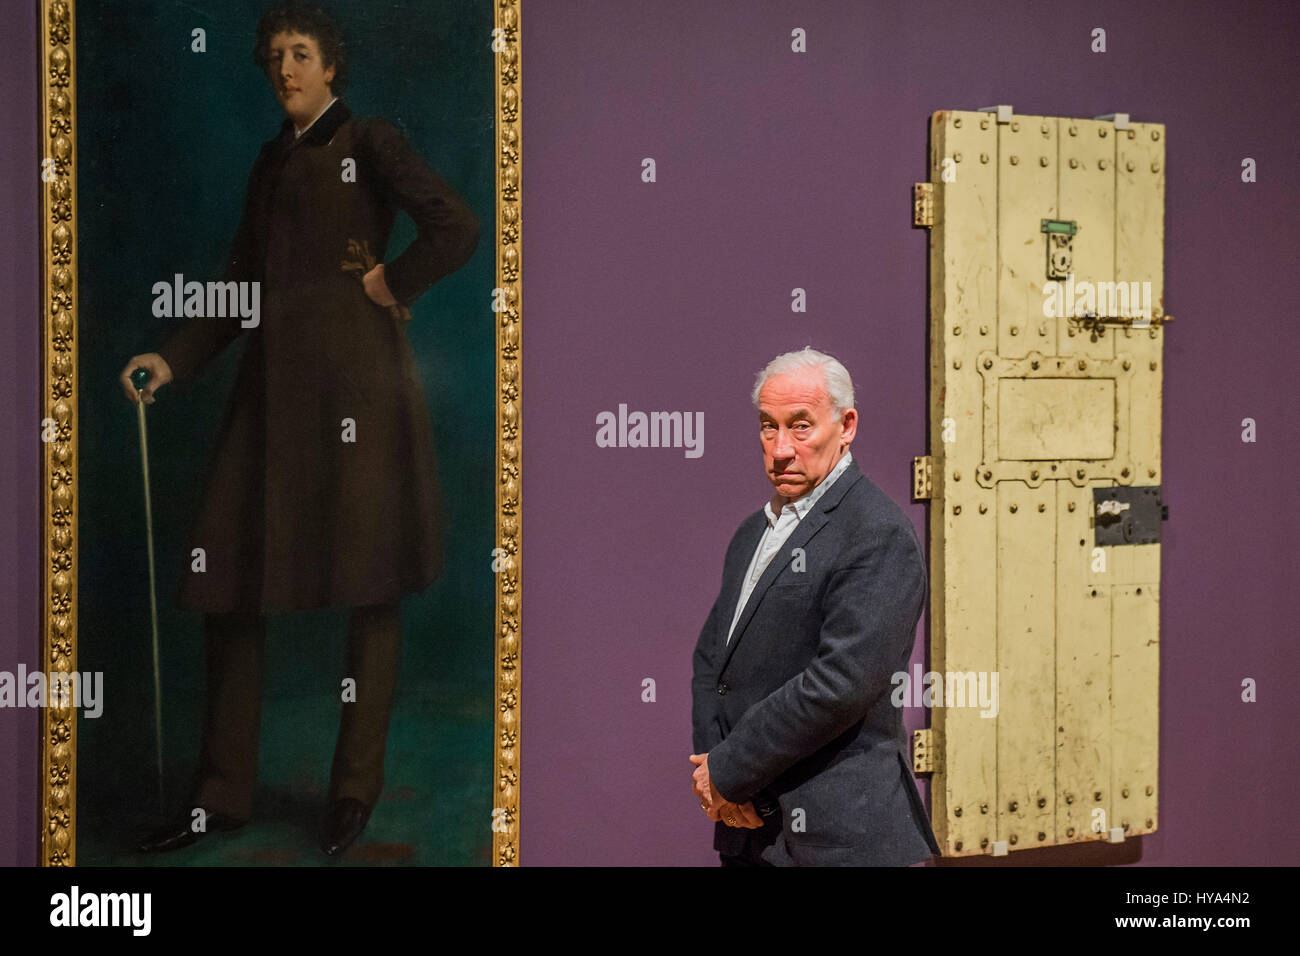 London, UK. 3rd Apr, 2017. Simon Callow with Oscar Wilde by Robert Goodloe Harper Pennington (1881)and the door of Oscar Wilde's prison cell (no. C.3.3) at Reading jail - Queer British Art 1861-1967 a new exhibition at Tate Britain marks the 50th anniversary of partial decriminalisation of male homosexuality in England and Wales. Spanning the playful to the political, the explicit to the domestic, Queer British Art 1861-1967 showcases the rich diversity of queer visual art and its role in society. Credit: Guy Bell/Alamy Live News Stock Photo